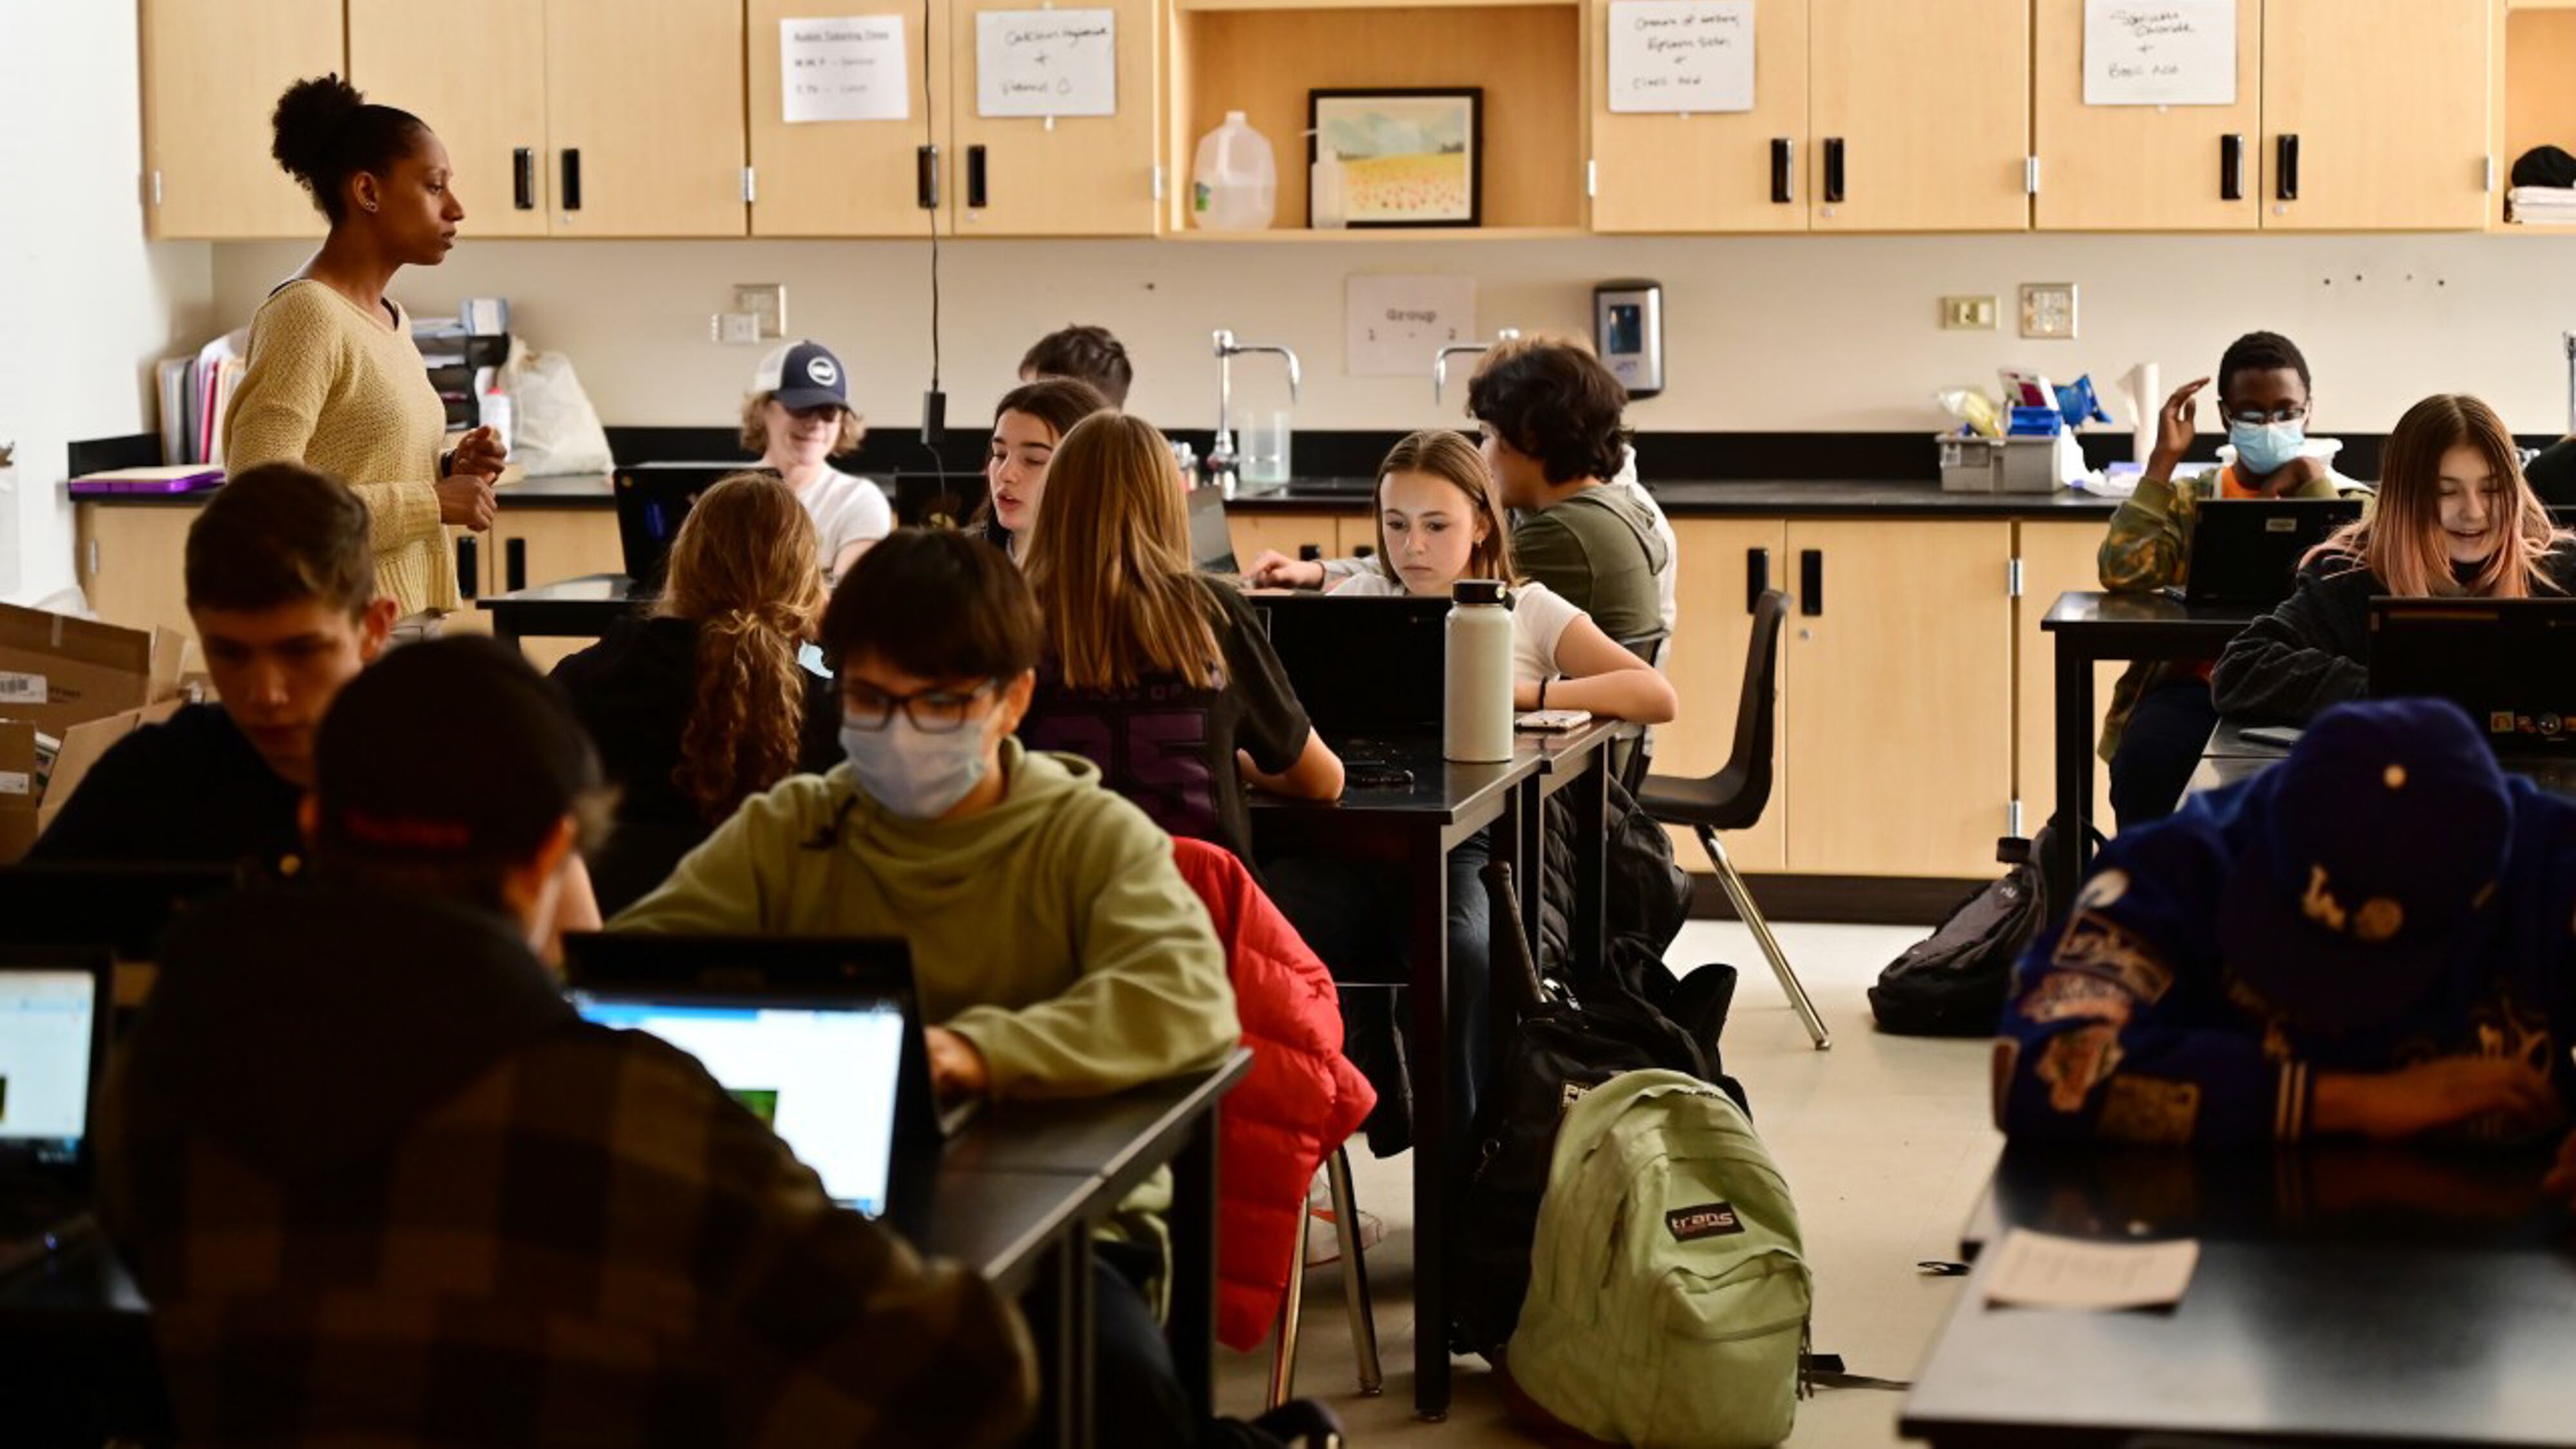 A high school teacher works with her students who are seated at tables in a science lab.